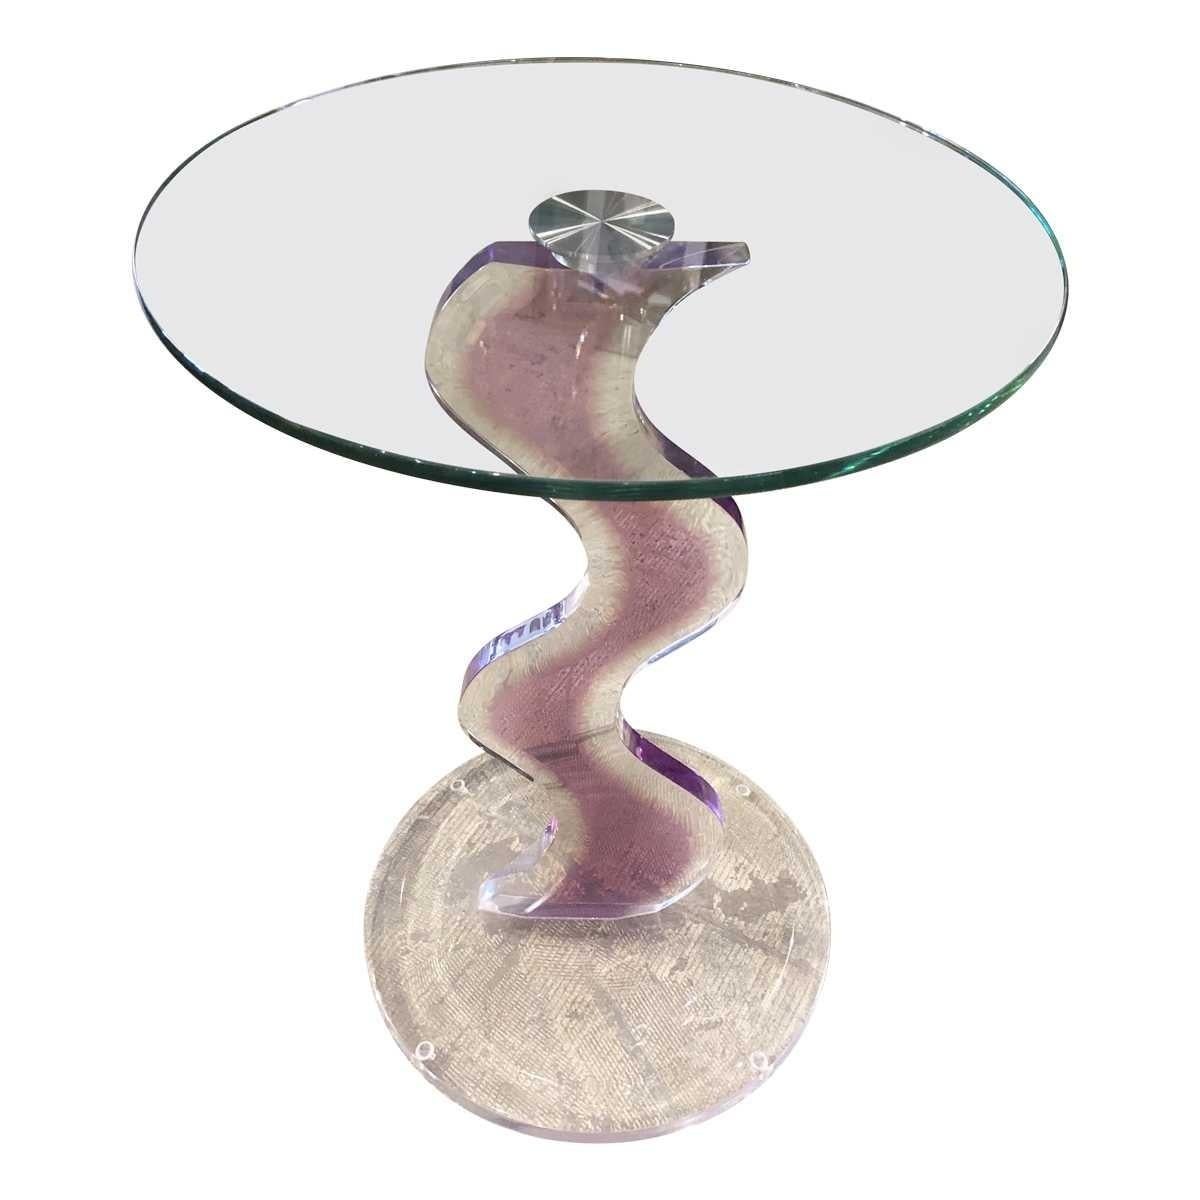 Acrylic and Lucite home pieces since 1965. Furniture from Muniz continues to impress customers and blend beautifully into contemporary homes.
Materials: Acrylic, glass
Dimensions:
Height 24.50